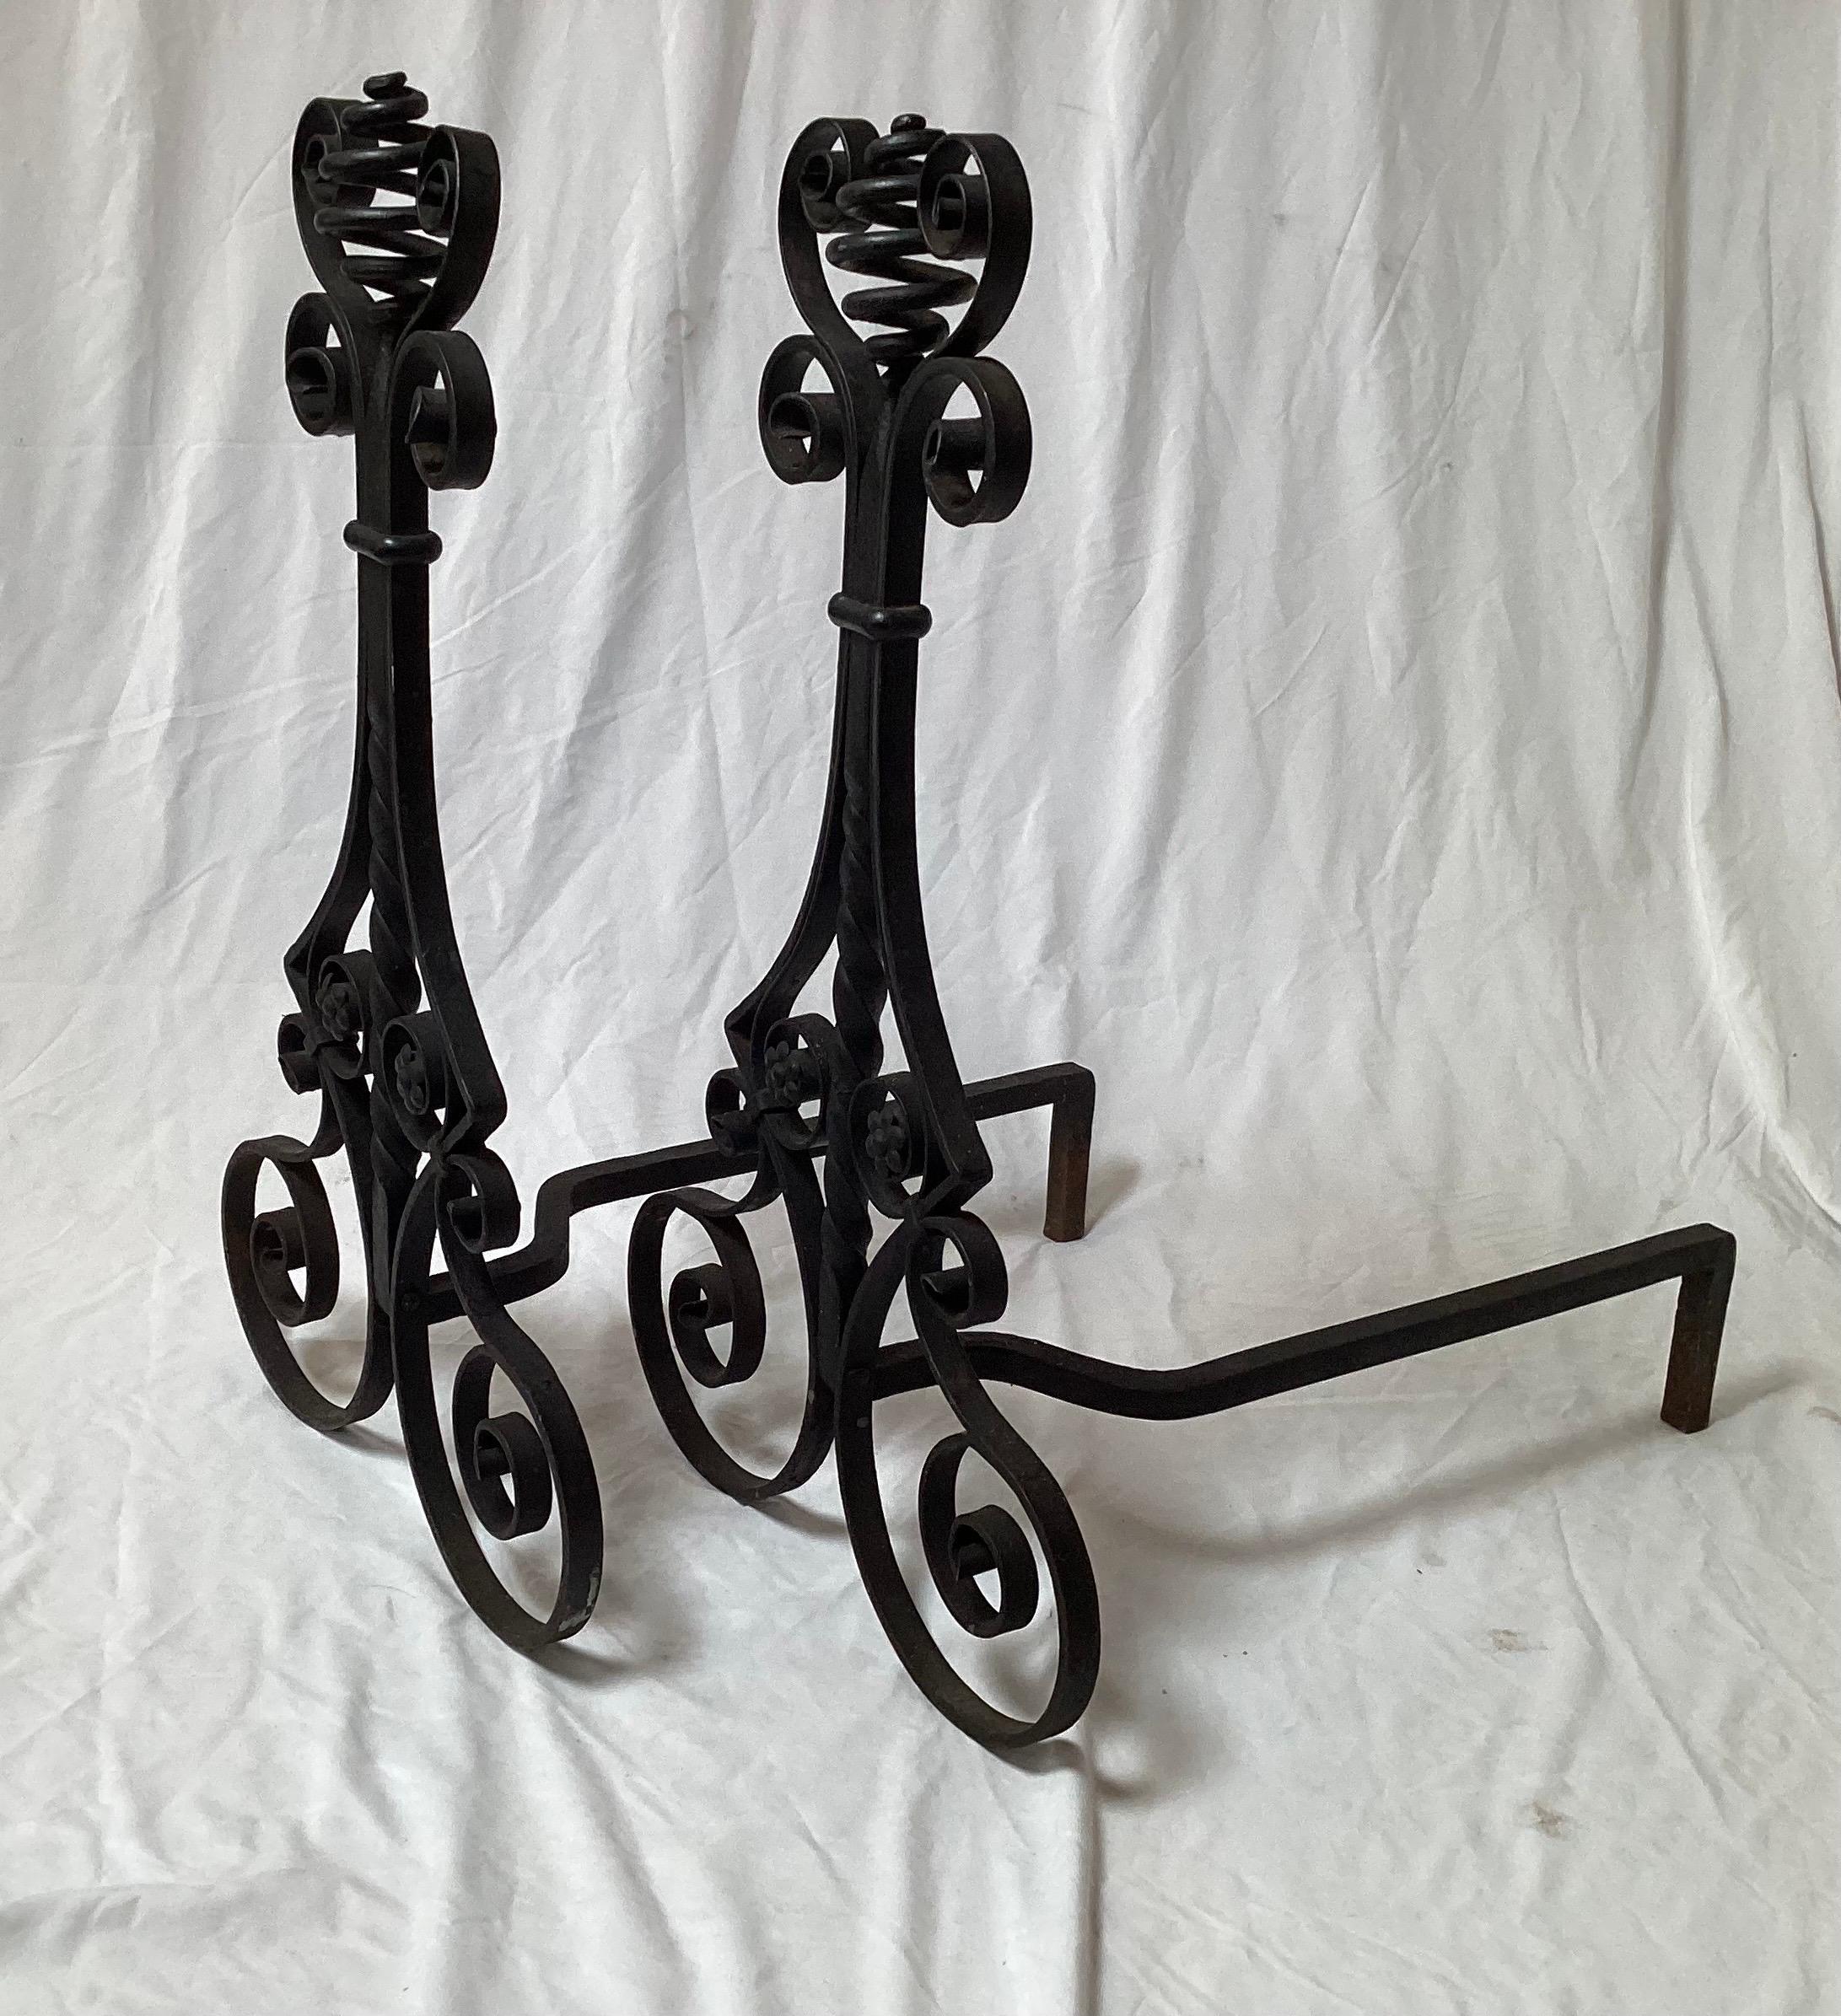 Large Aesthetic Movement Hand Wrought Black Iron Andirons 28” Tall By 22” deep and 16” wide. Each andiron is one piece. Great condition with just some age-appropriate wear.